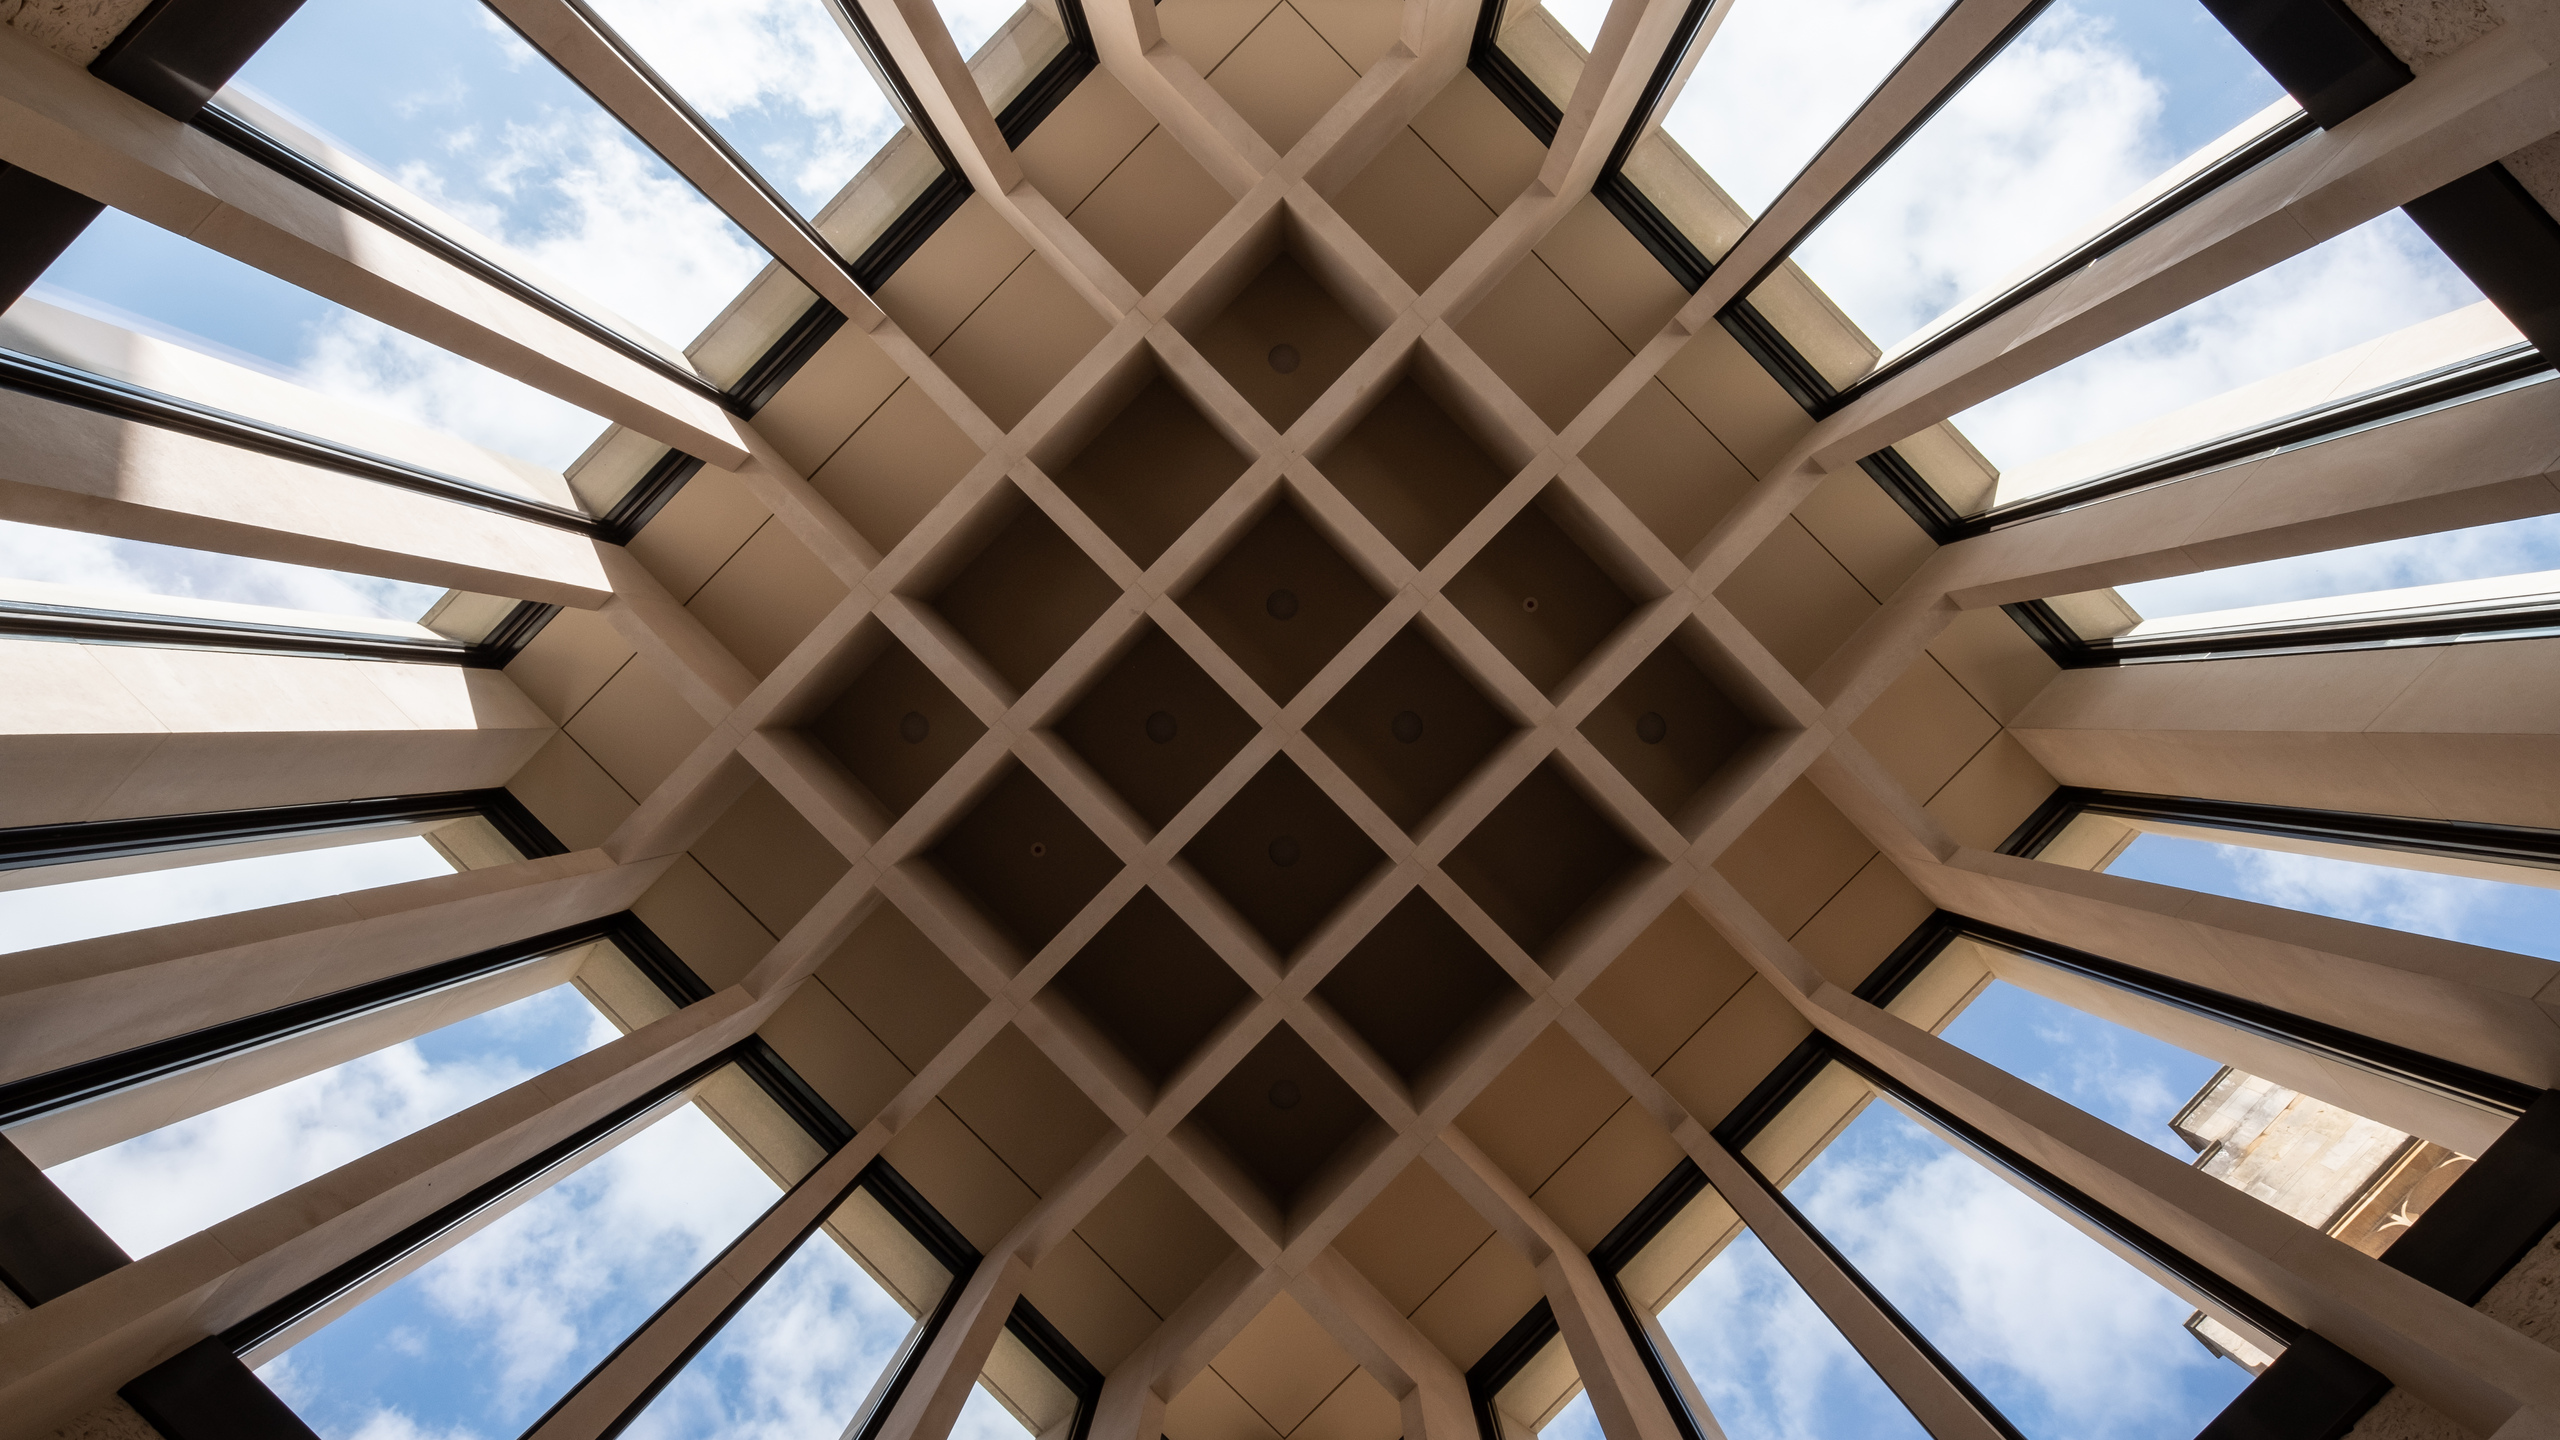 WongAvery Music Gallery's ceiling shows its architectural beauty from below